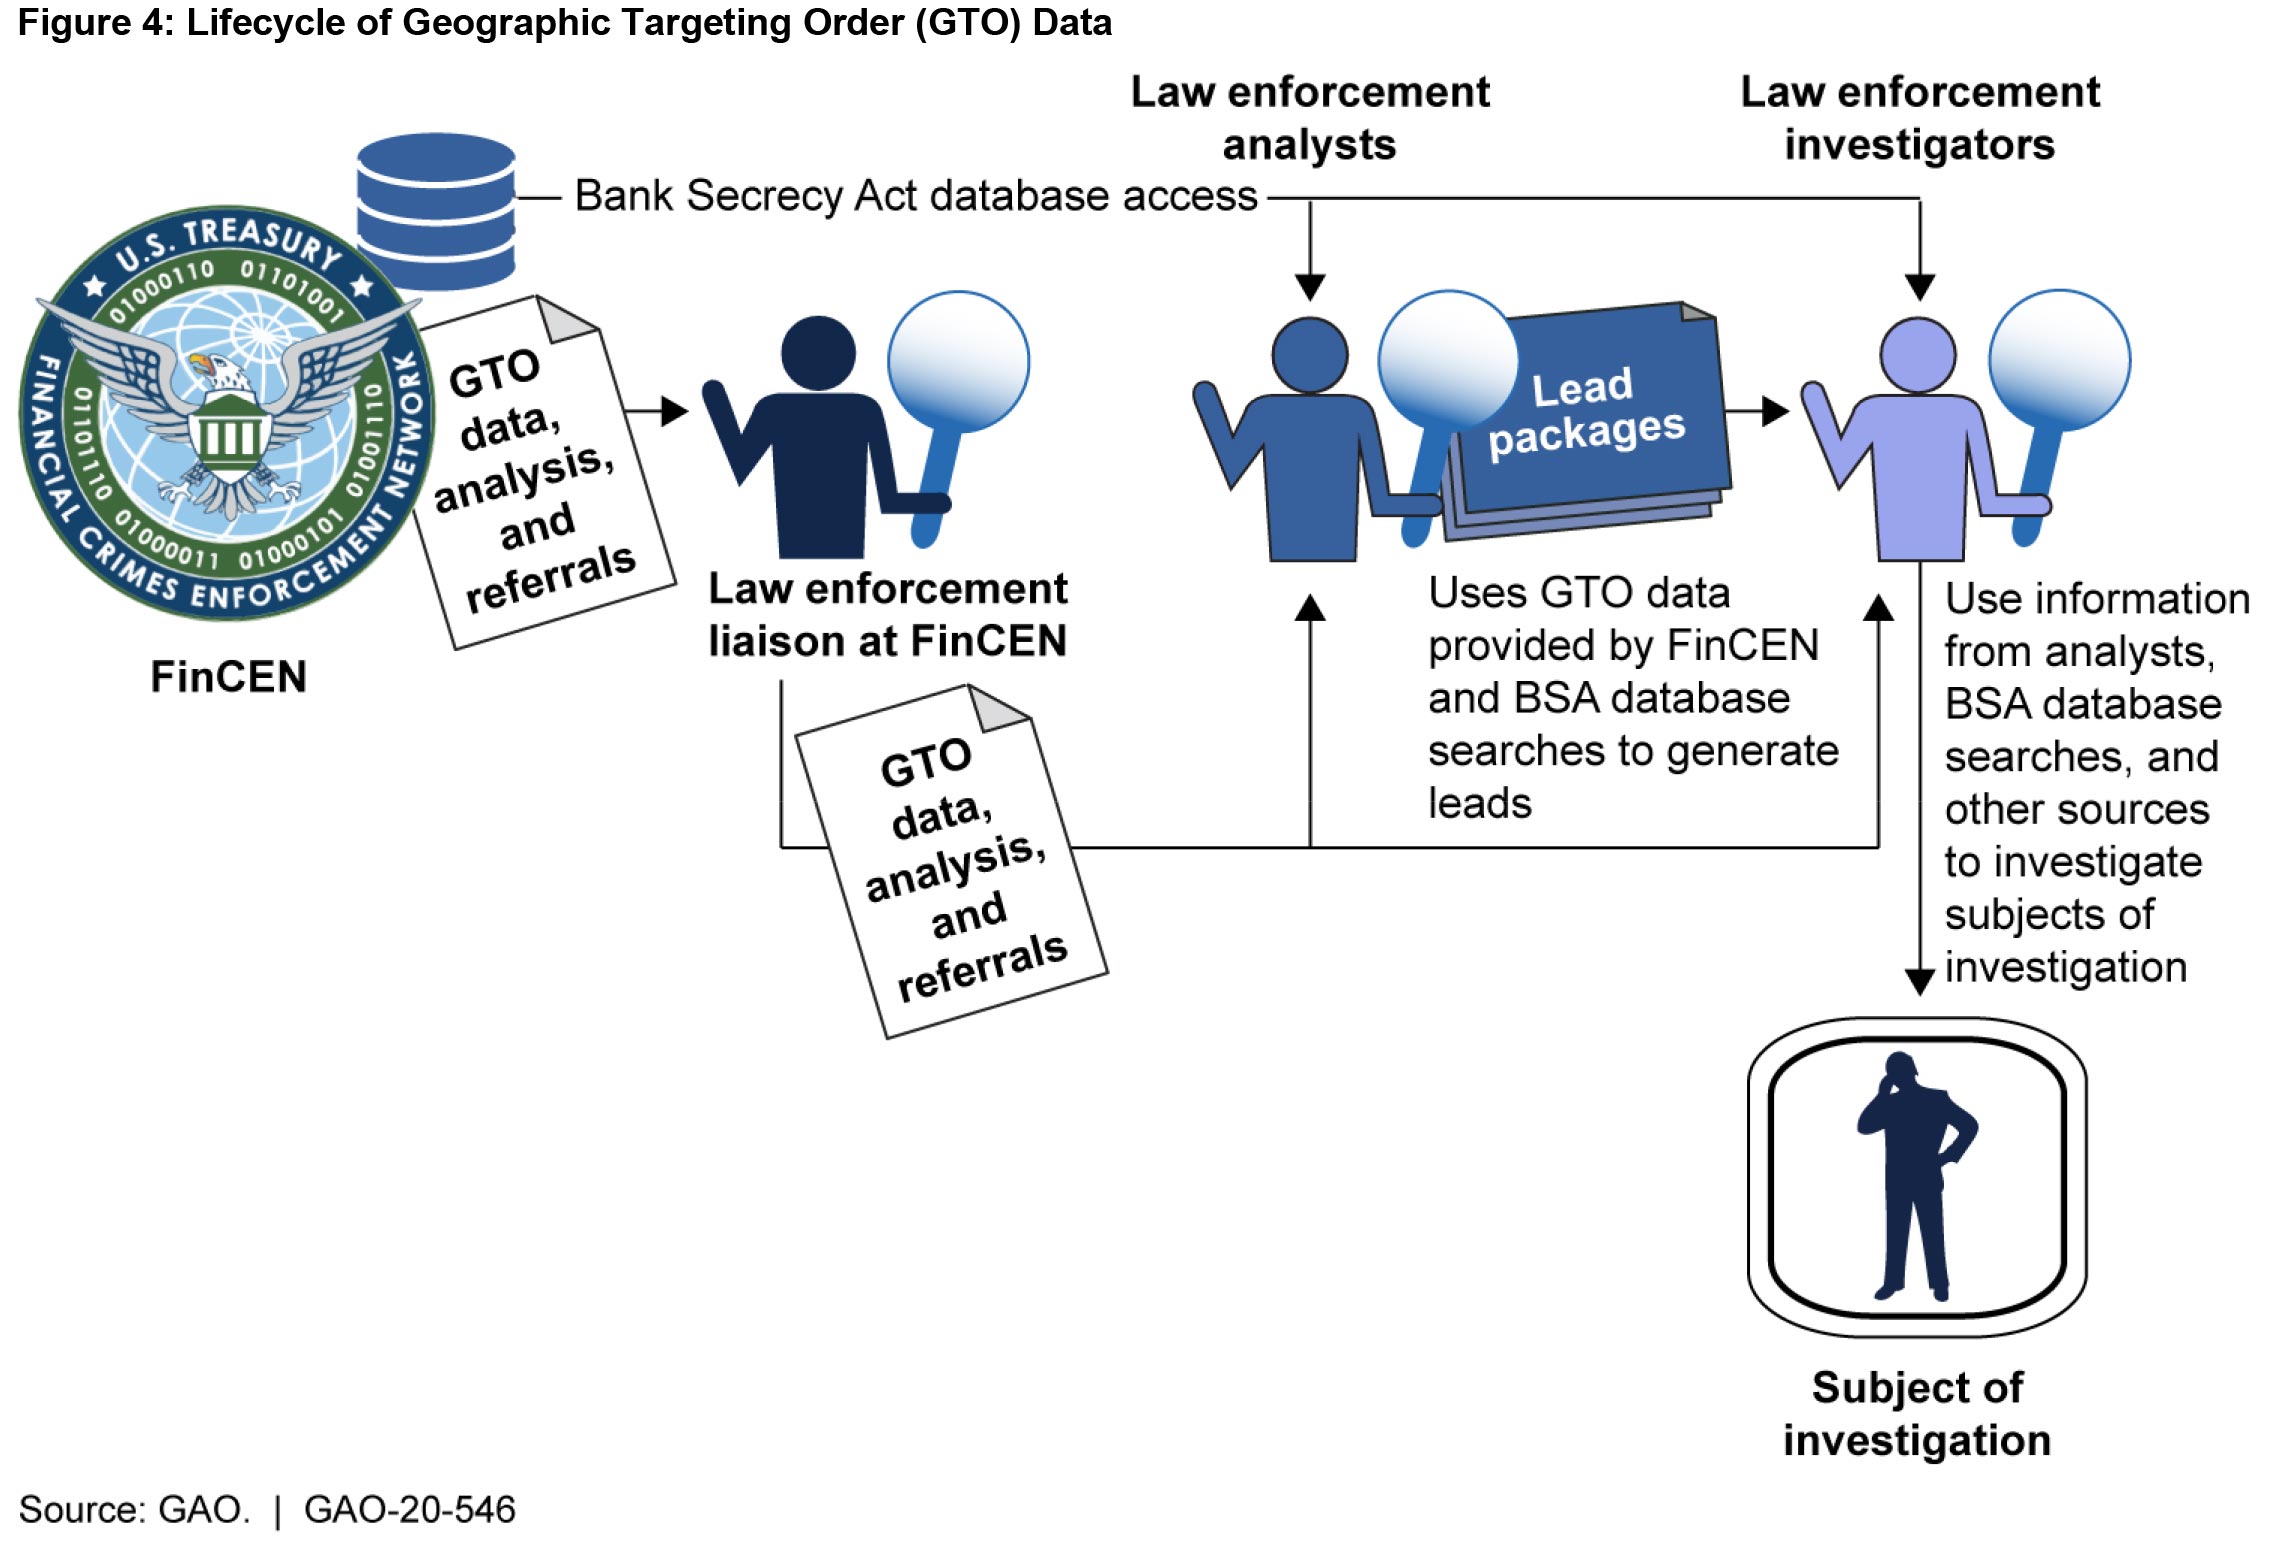 Lifecycle of Geographic Targeting Order (GTO) Data